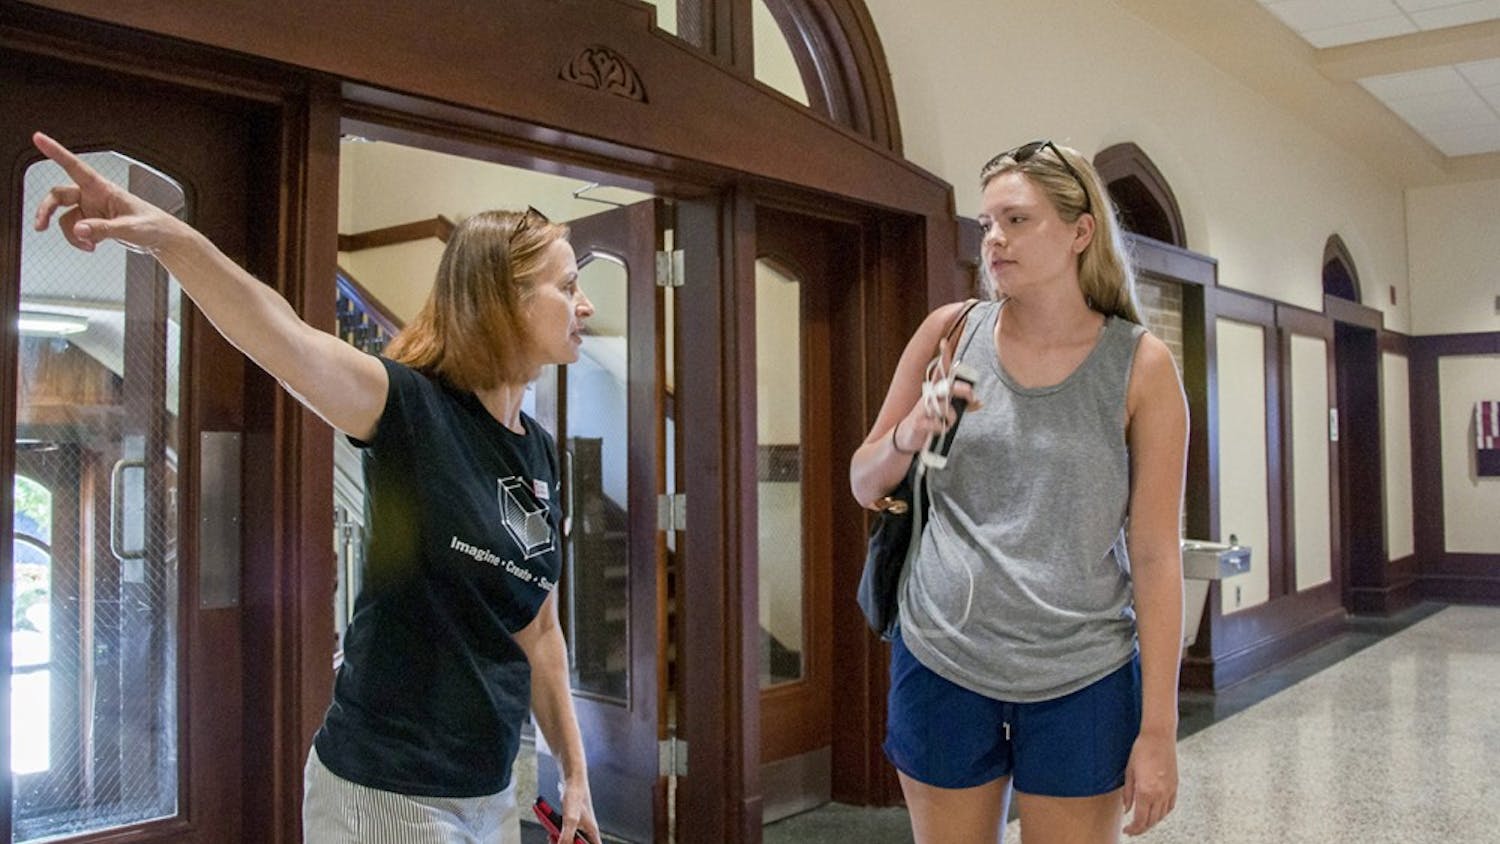 Anne Kibbler on the left, the Director of Communications and Media Relations, answers Emma Barnhard's questions about the layout of Franklin Hall on Monday morning at Franklin Hall. Now, Franklin Hall is the new building of Media School.